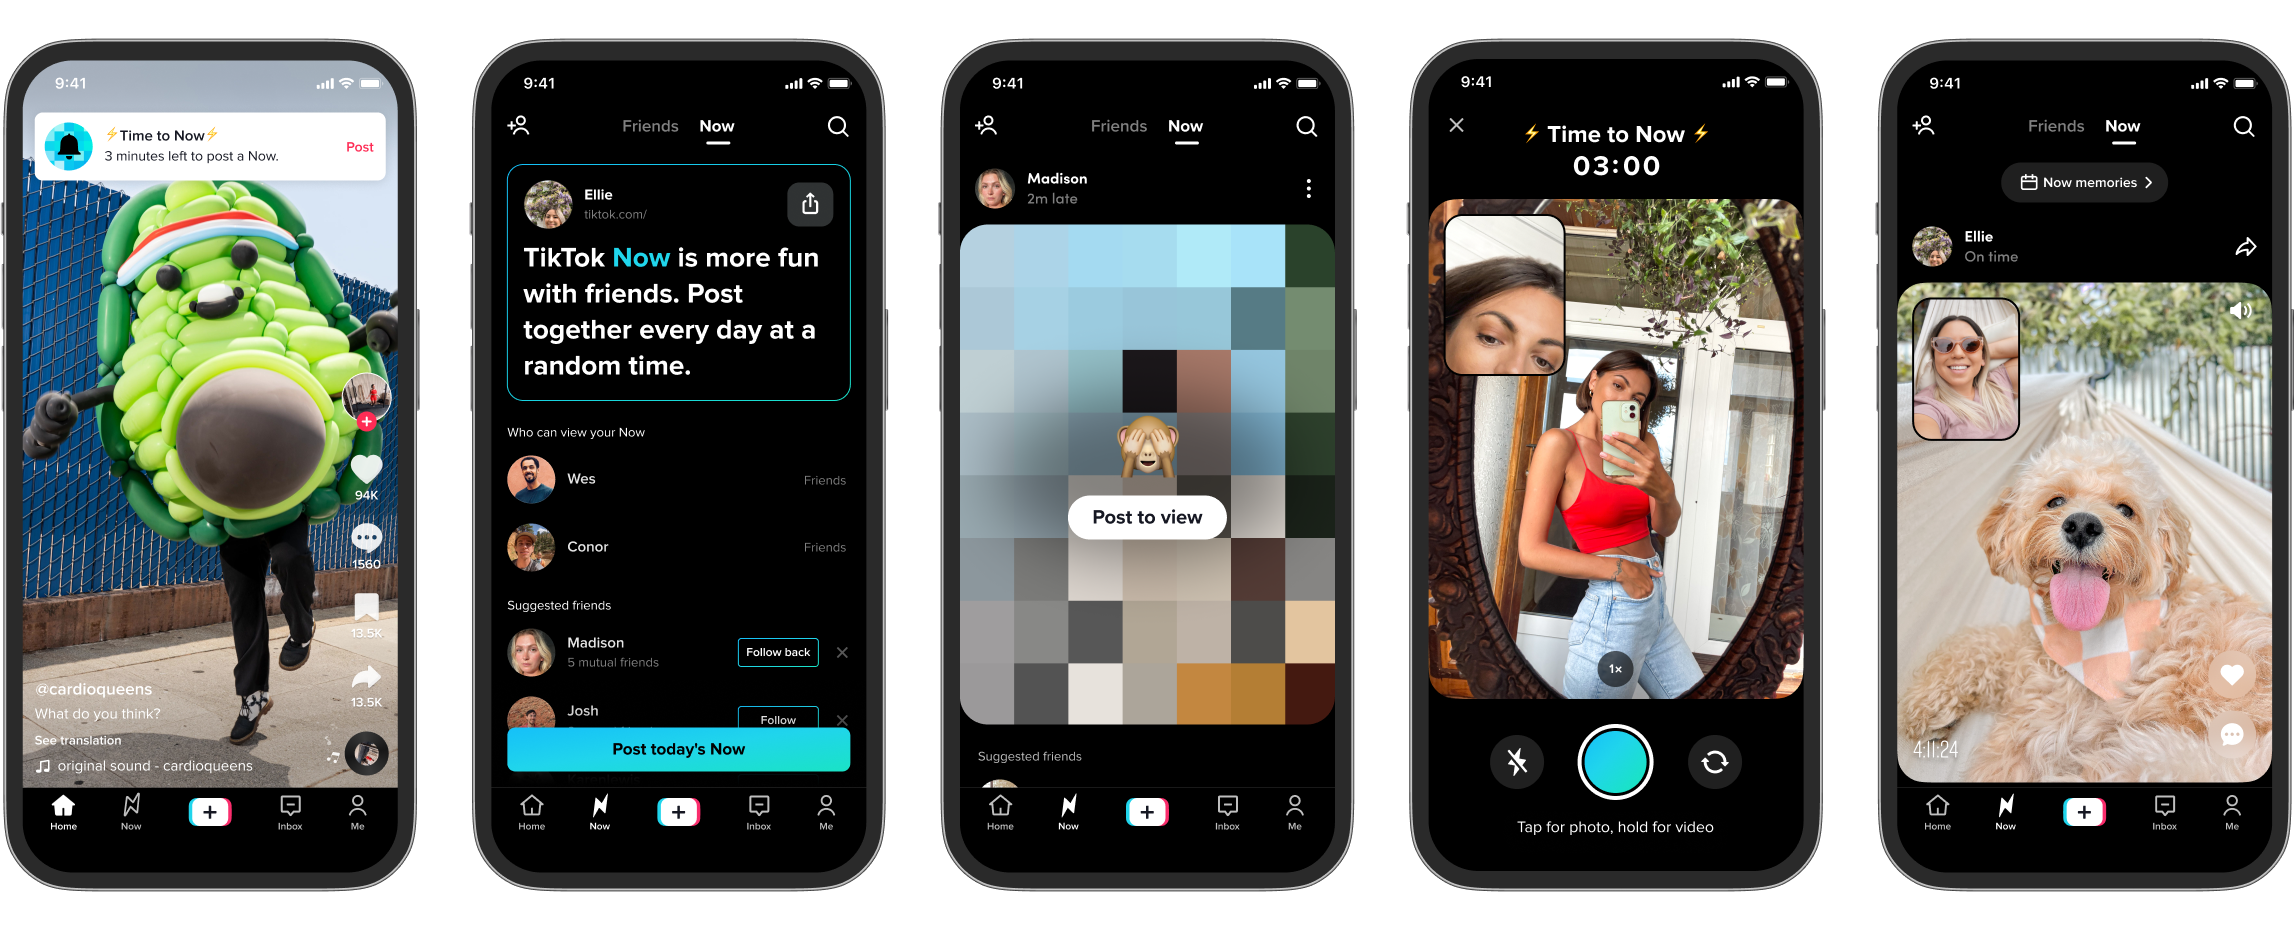 This Week in Apps: iOS 16 takes off, TikTok clones BeReal, social cos go to Congress